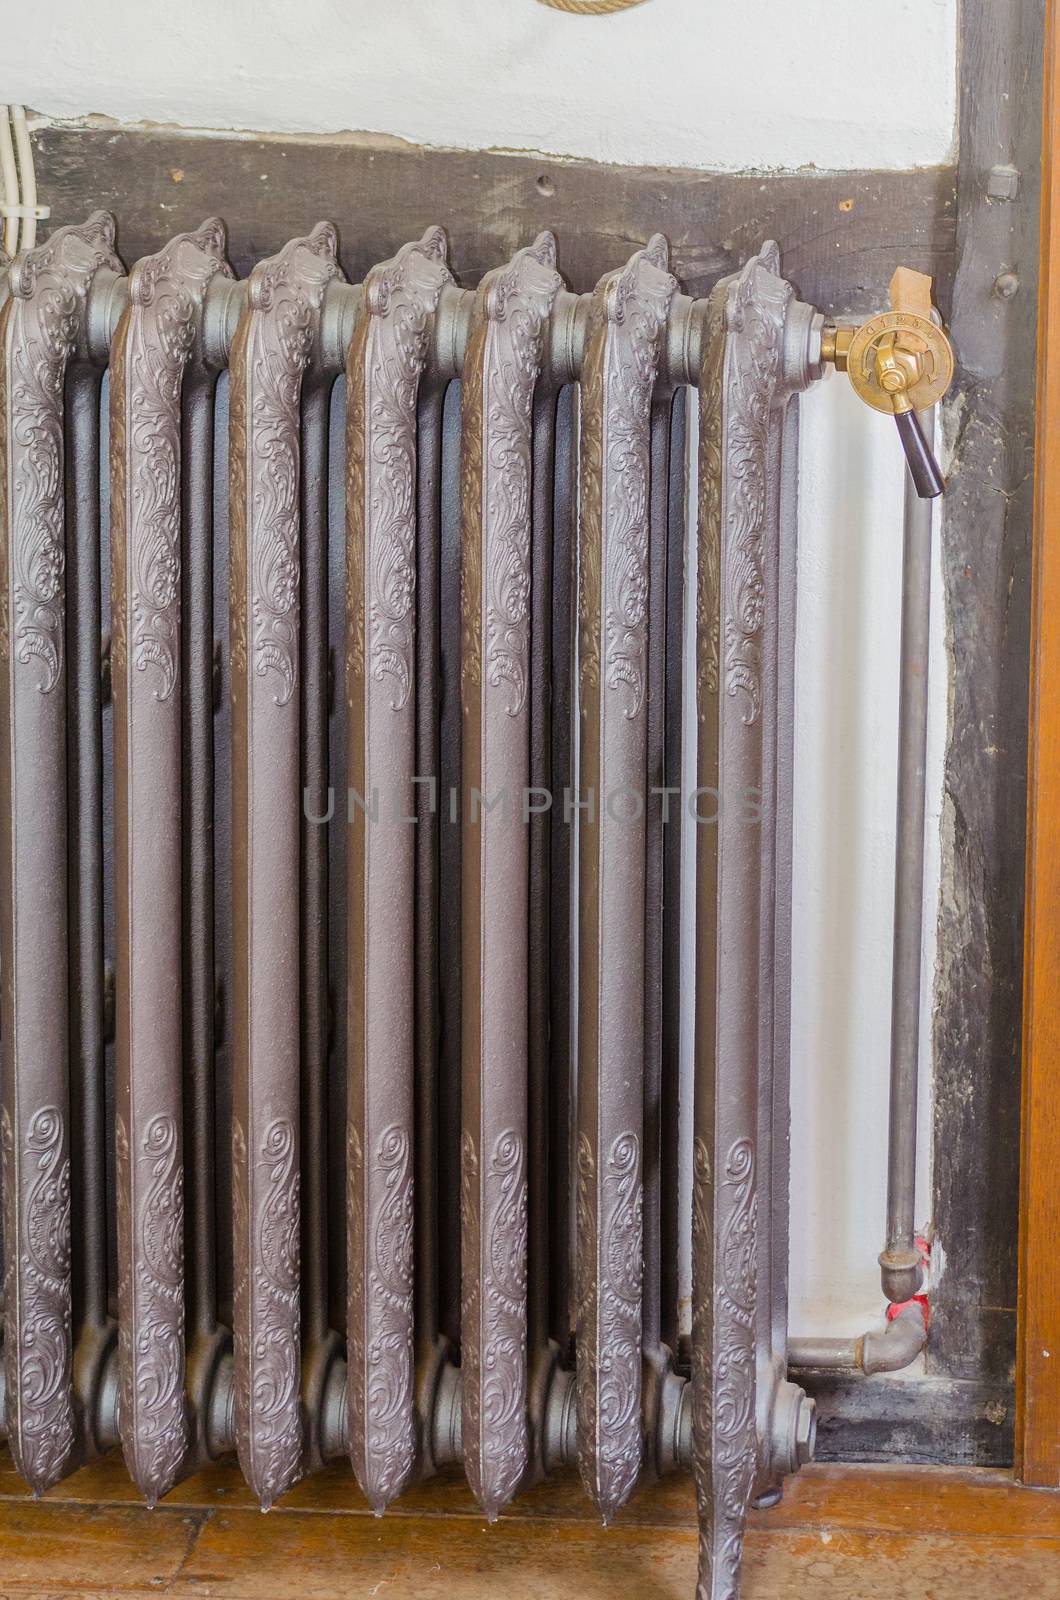 Antique radiator of a central heating      by JFsPic